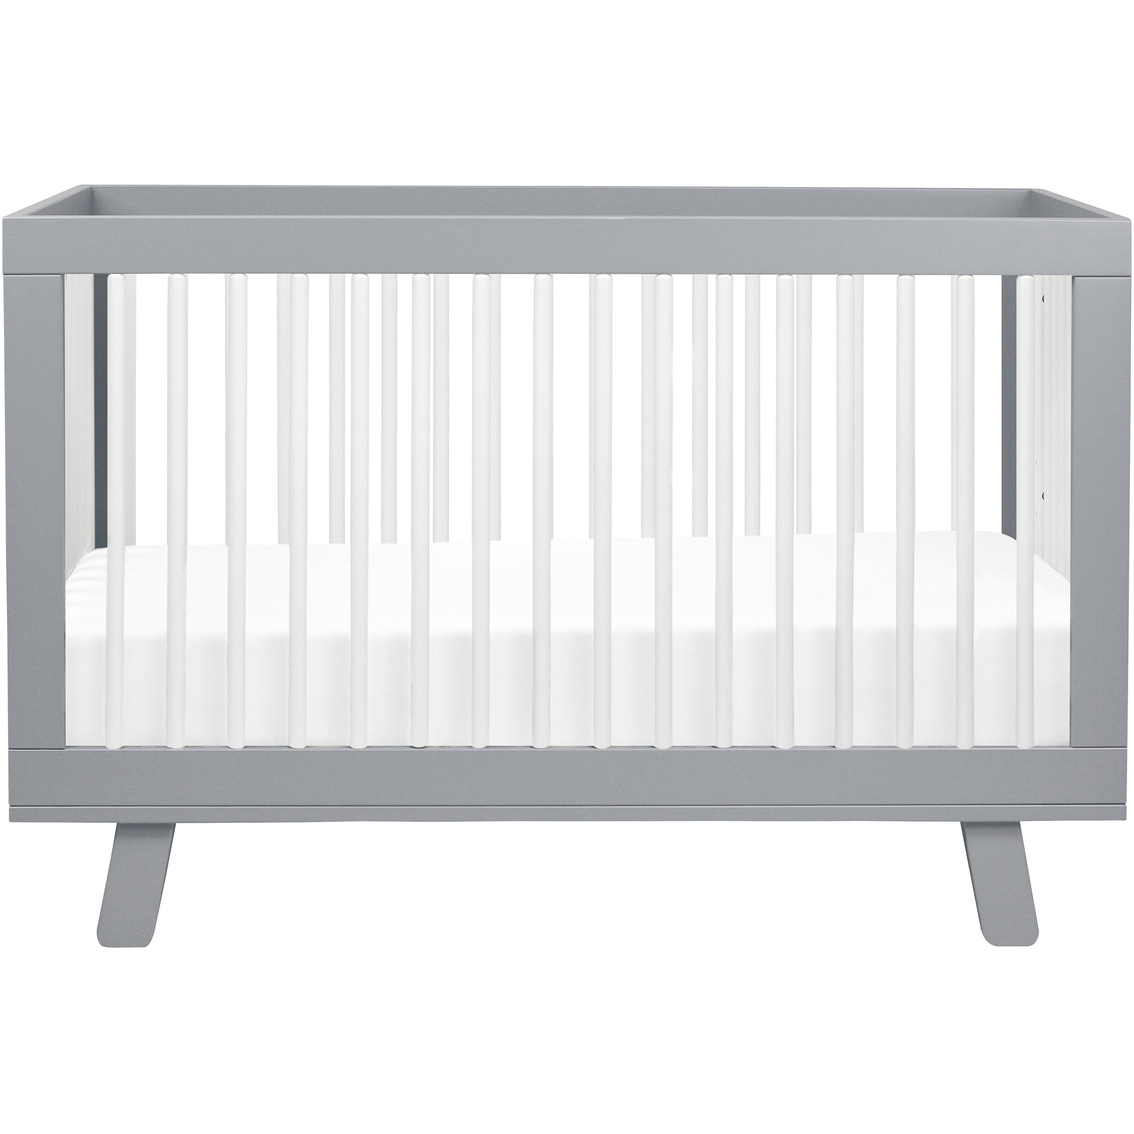 Babyletto Hudson 3 in 1 Convertible Crib - Image 2 of 8